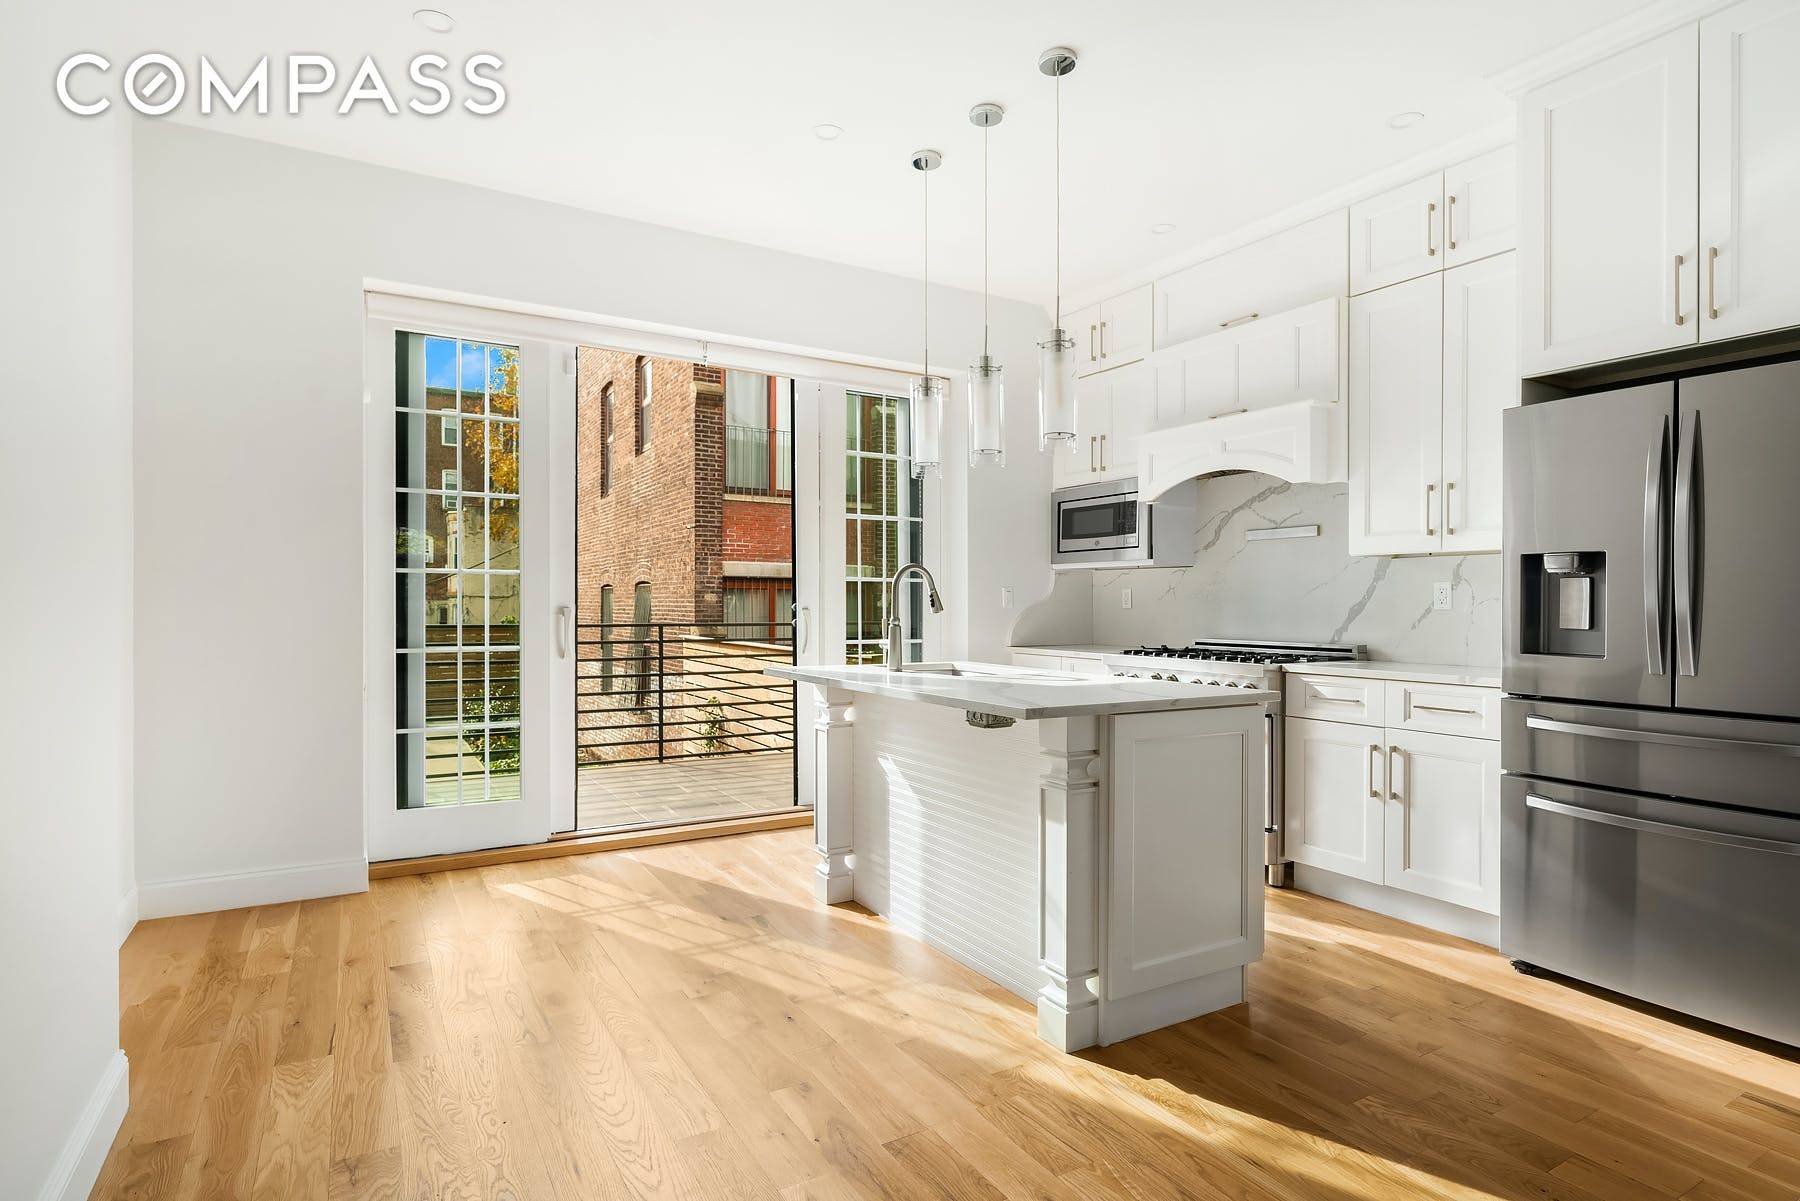 Flawless design, fantastic light and a masterful renovation await in this exceptional three bedroom, three and a half bathroom triplex on a beautiful tree lined block in Crown Heights.